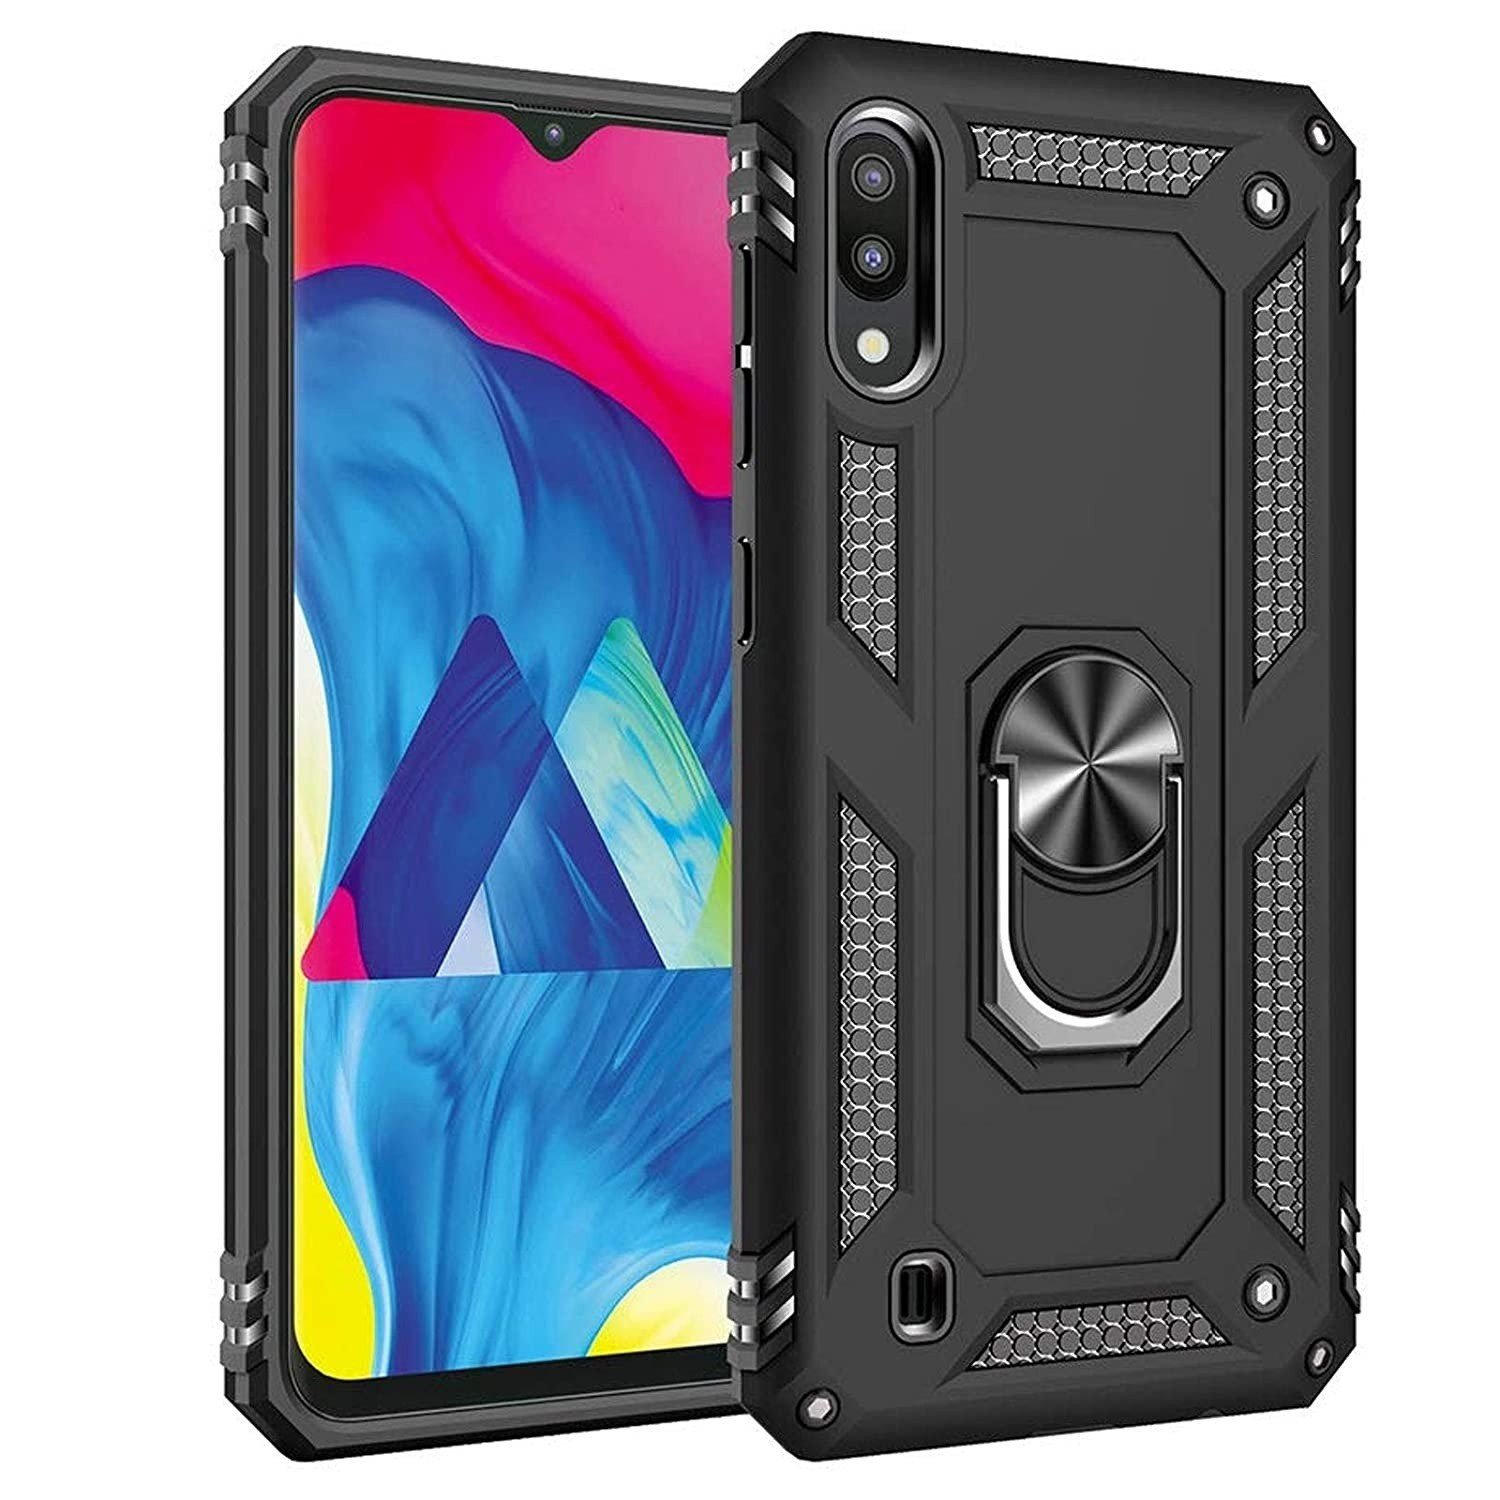 Galaxy S10 Phone Cases with Stand Magnetic Ring Kickstand Bumper Shockproof Heavy Duty Hard Armor Protective Cover 6.1 Inch Vaki for Samsung Galaxy S10 Case Military Grade 